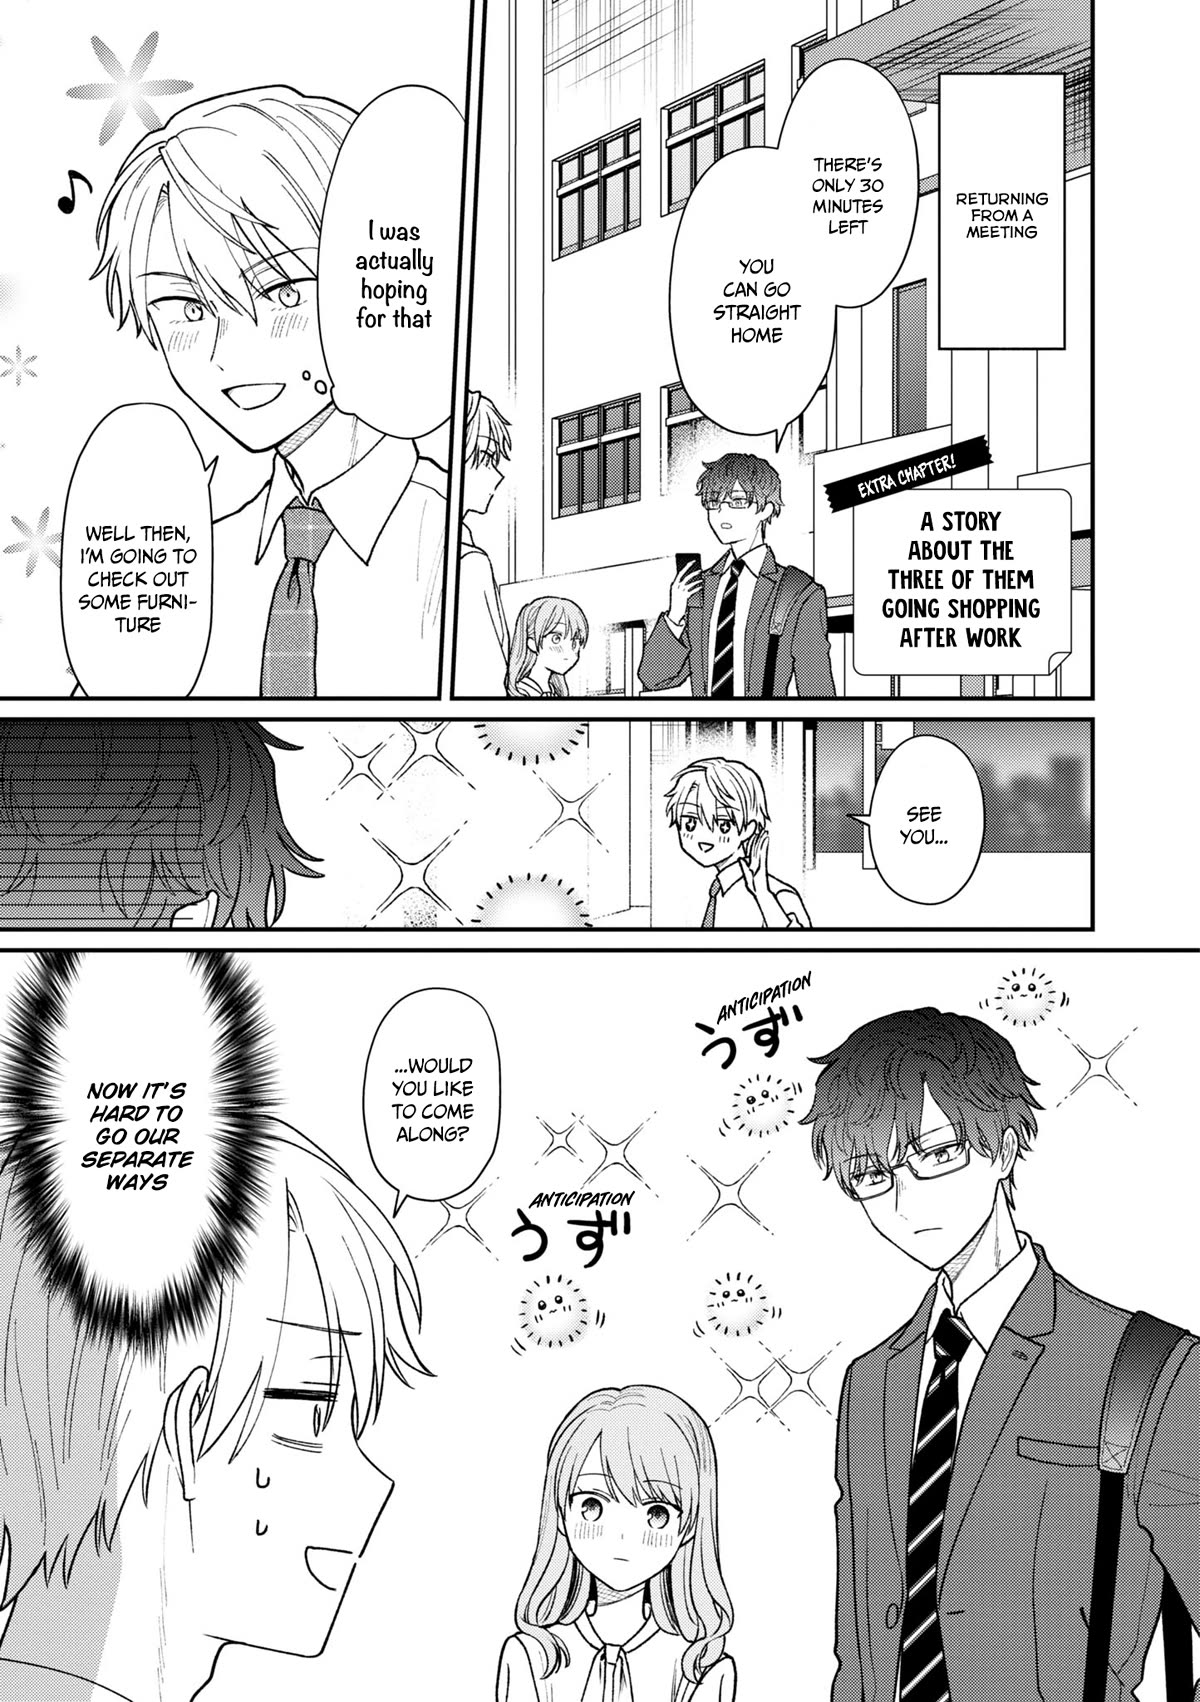 The New-Hire Who Could "Read" Emotions and the Unsociable Senpai - chapter 32.5 - #2